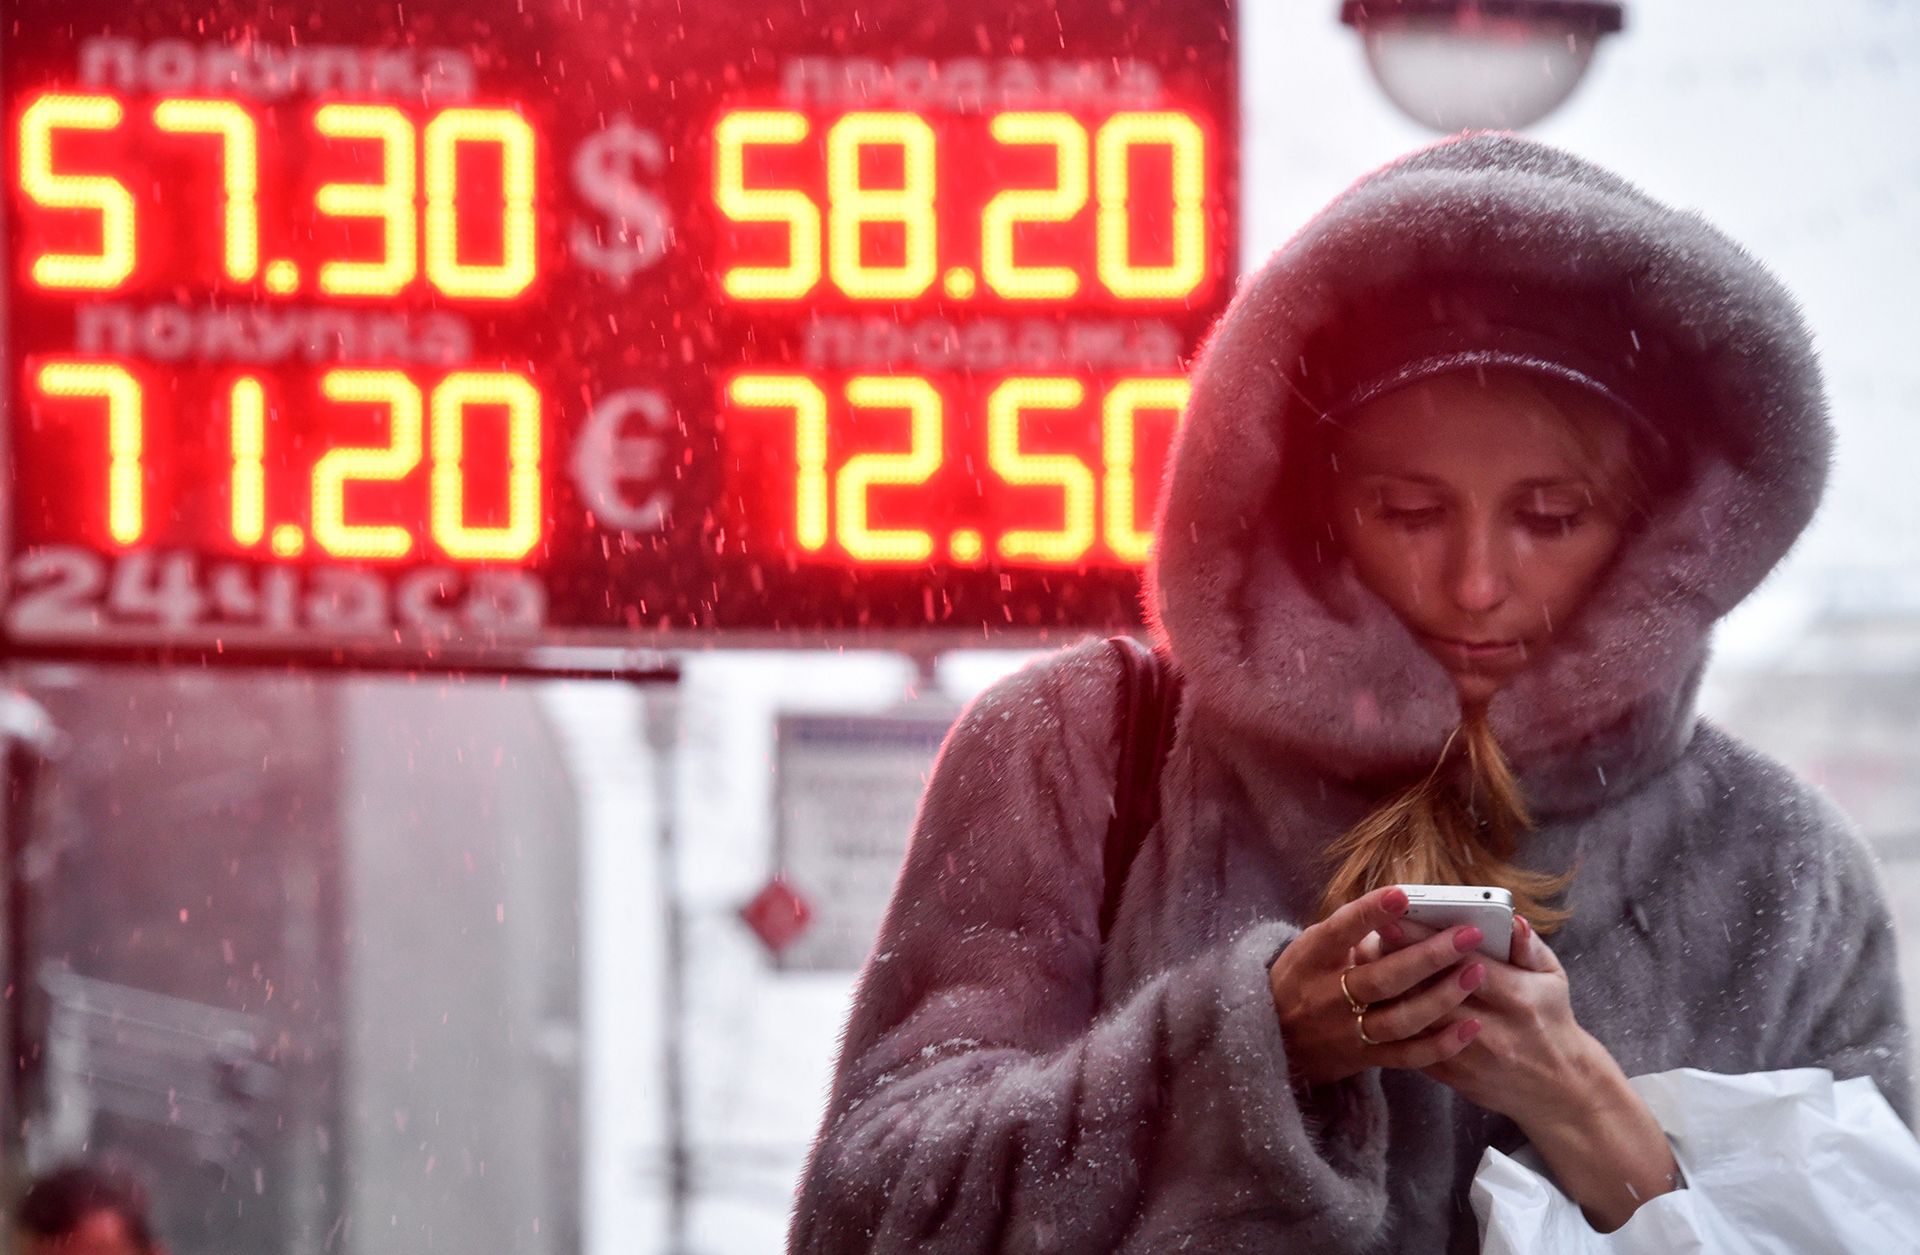 A woman in Moscow walks past a sign showing the Russian ruble's value compared the the U.S. dollar and euro.